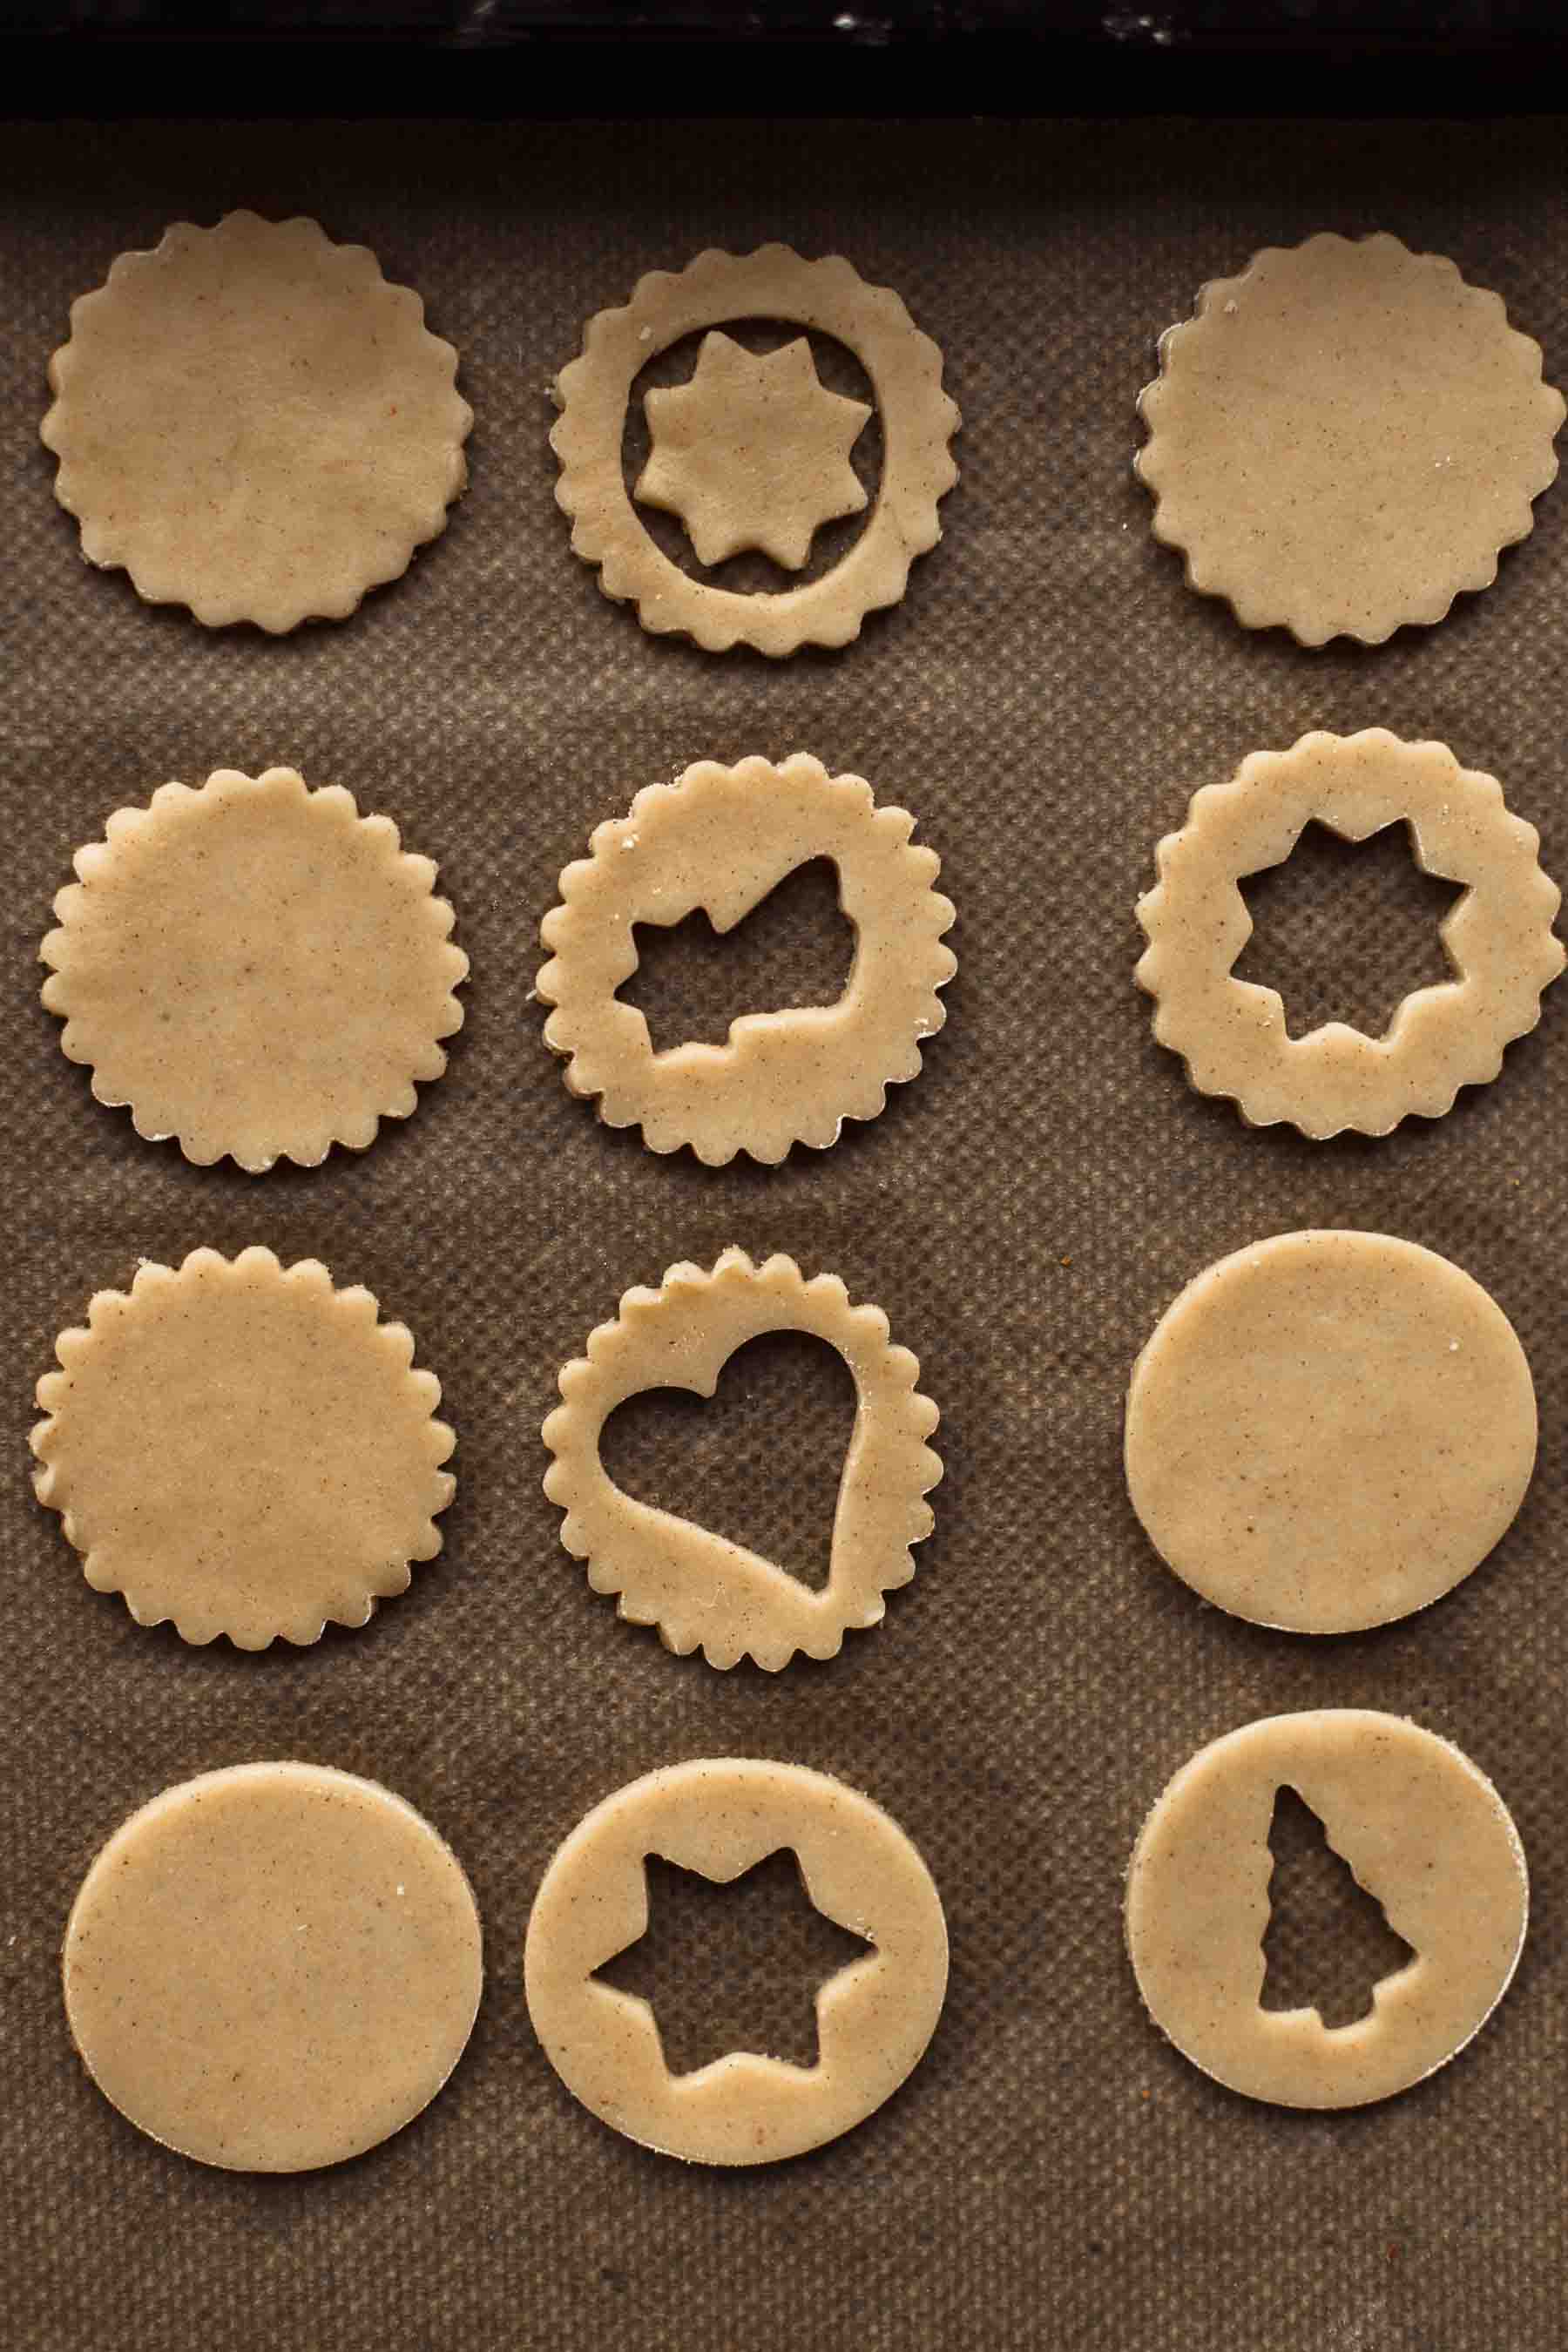 cut out cookies on a baking sheet ready to bake